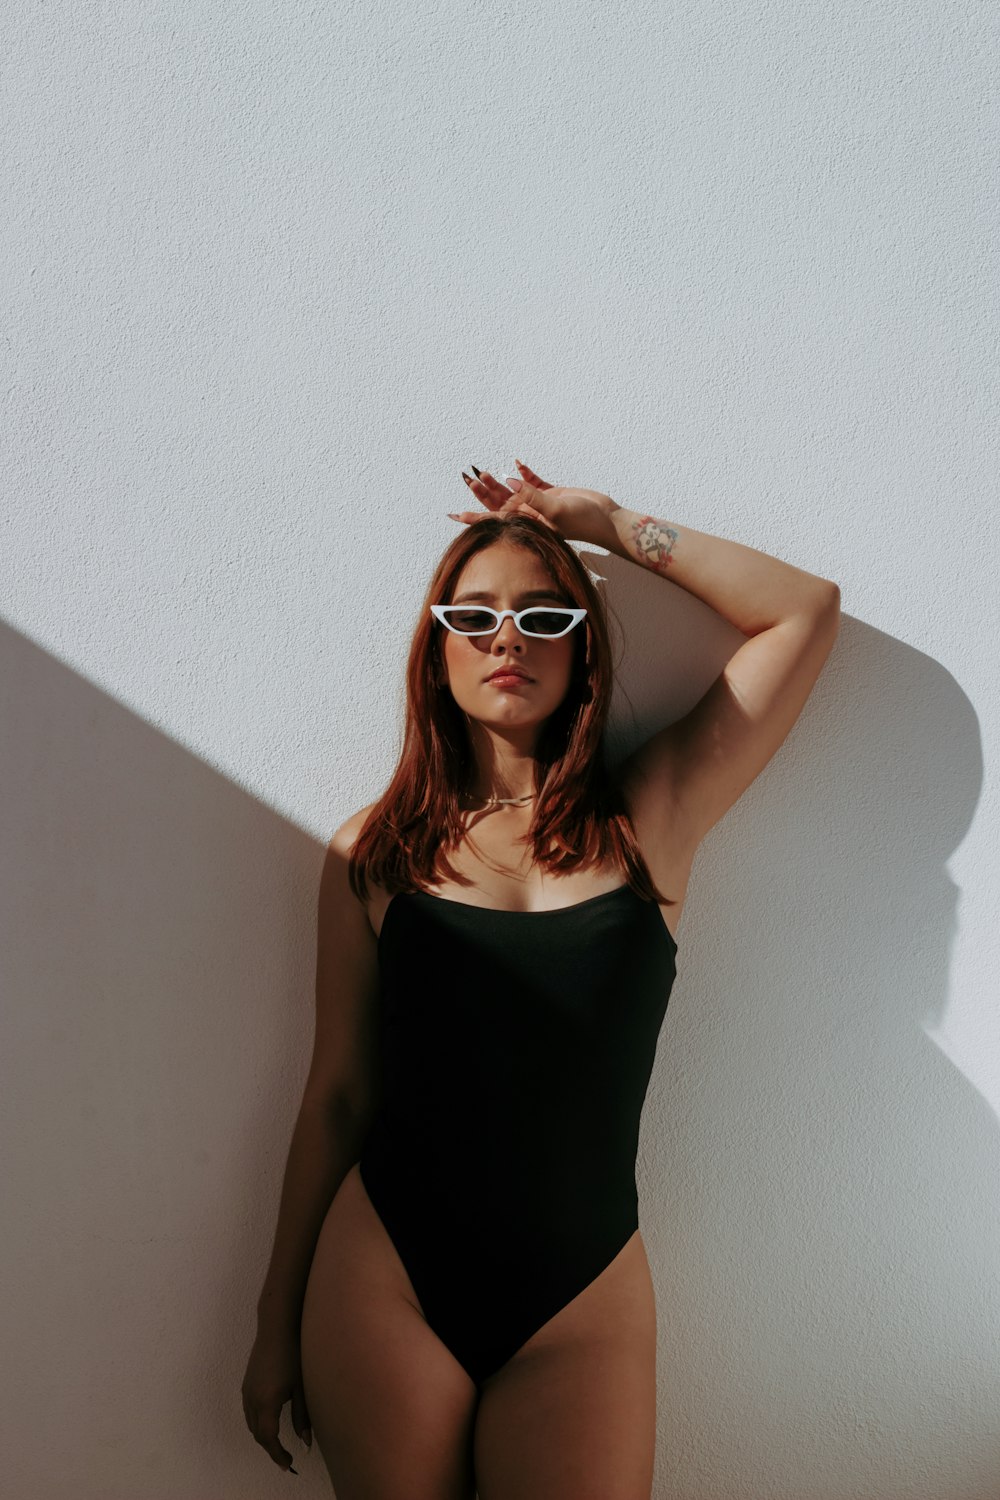 a woman in a black bodysuit and sunglasses